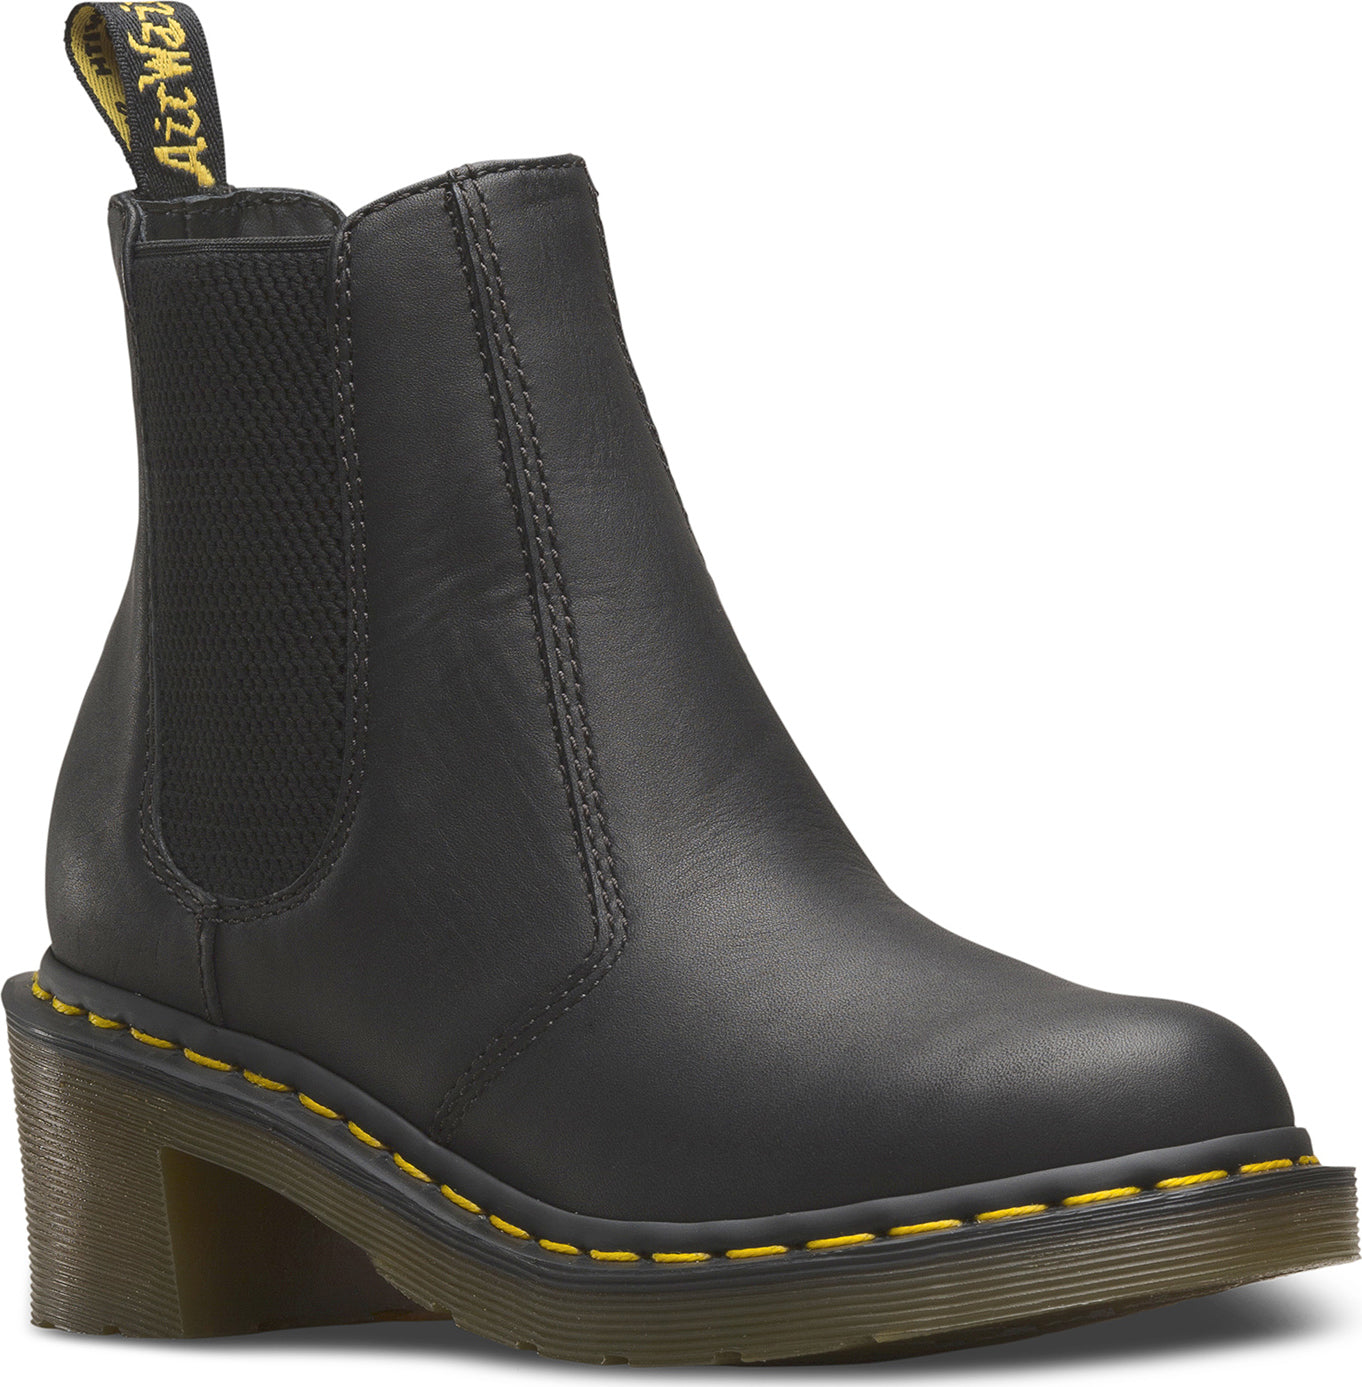 Dr. Martens Cadence Chelsea Boots - Women's | Altitude Sports